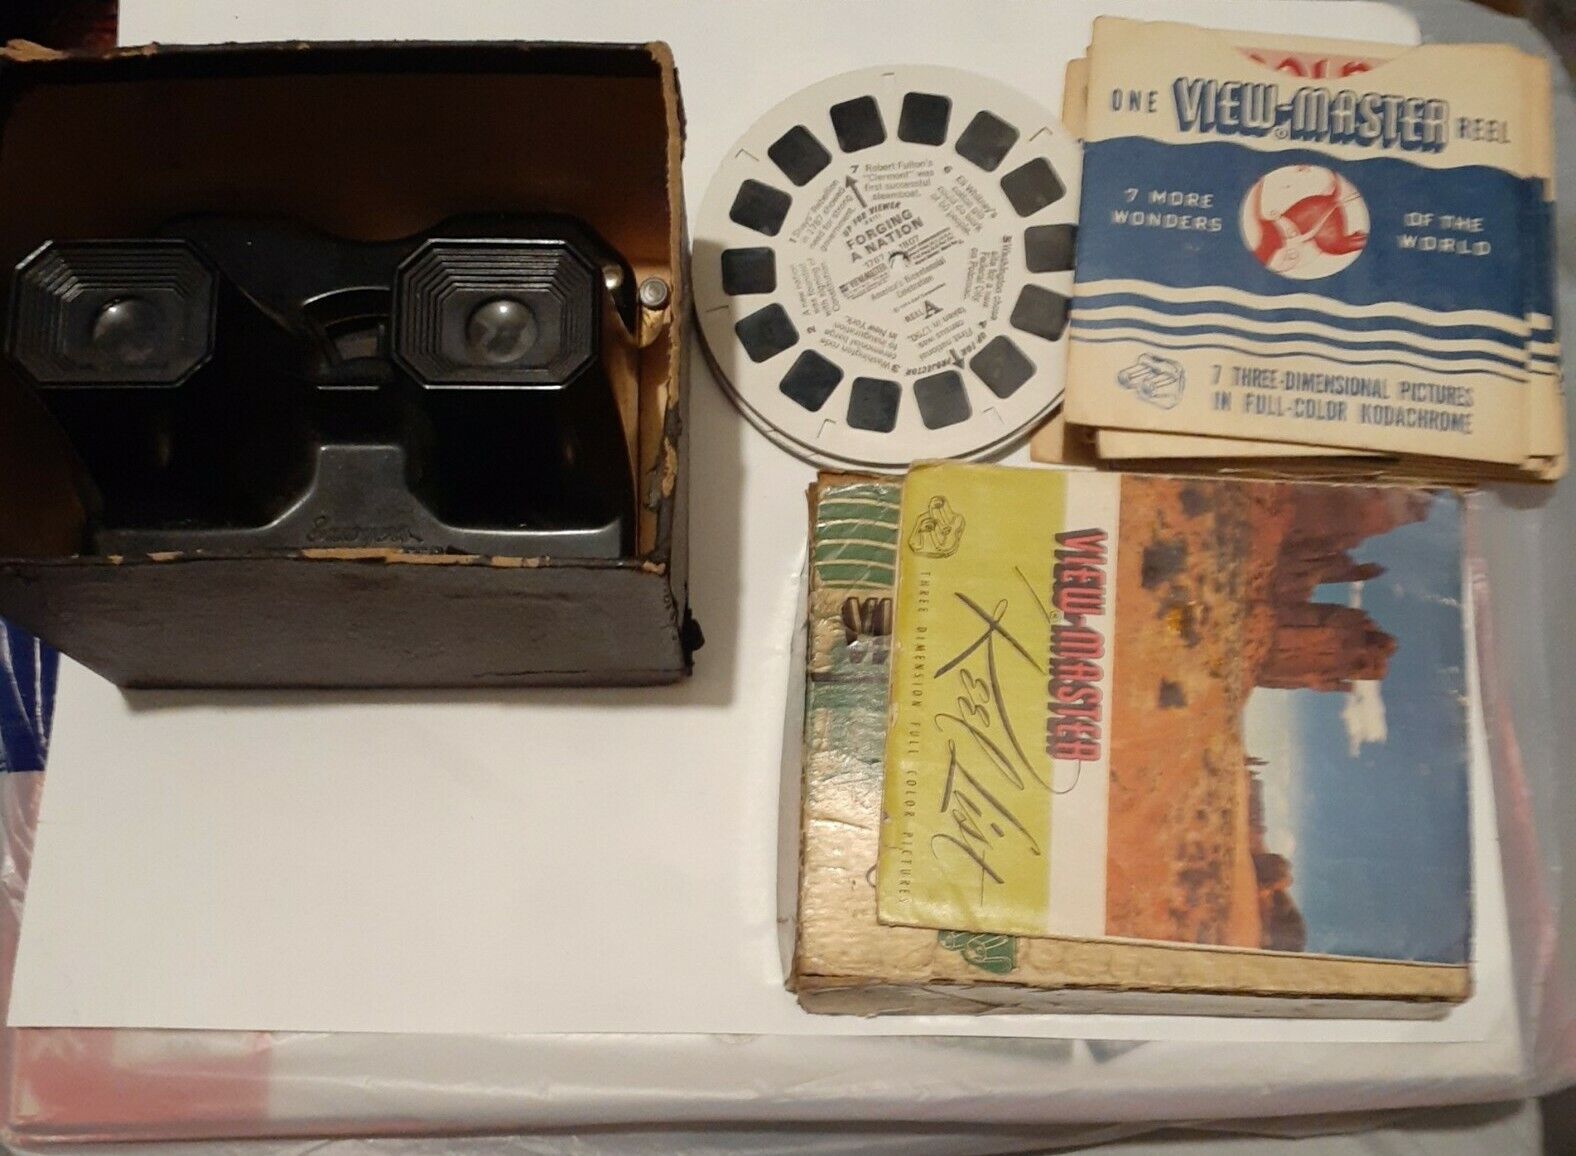 VTG Sawyers View Master Stereoscope Bakelite with many old reels...READ